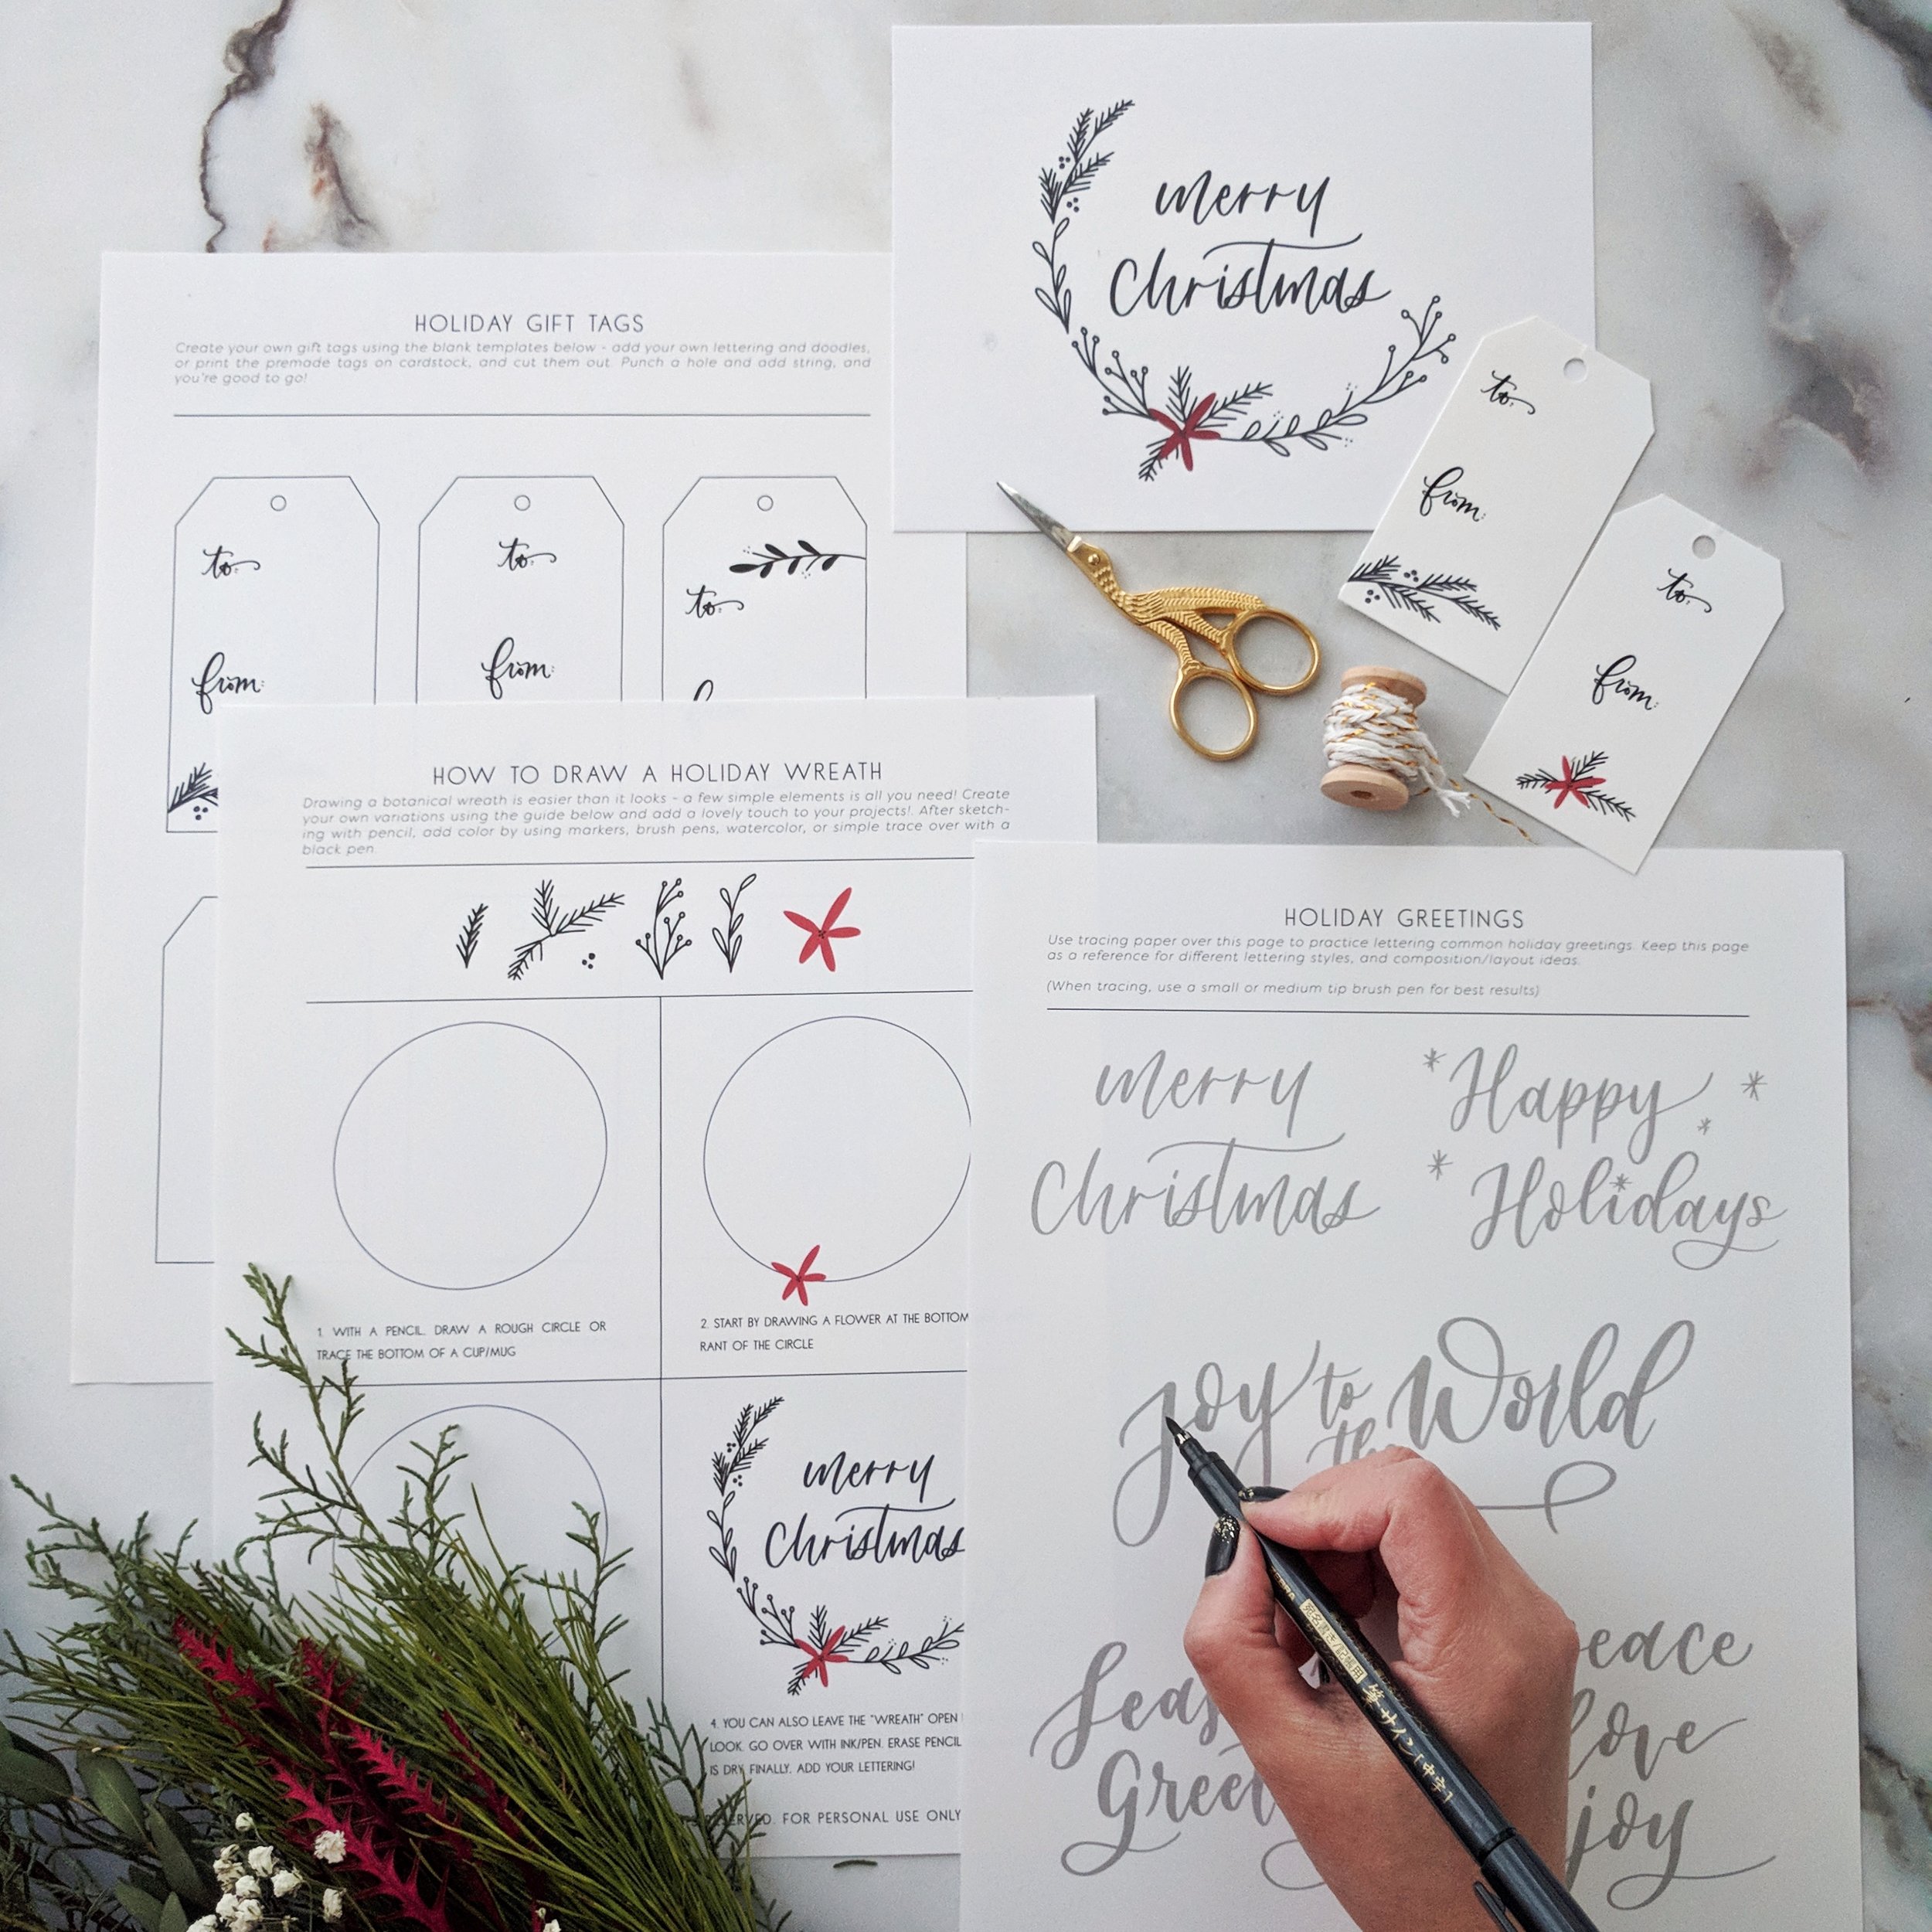 Free Printable Christmas Gift Tags: Add a Personal Touch to Your